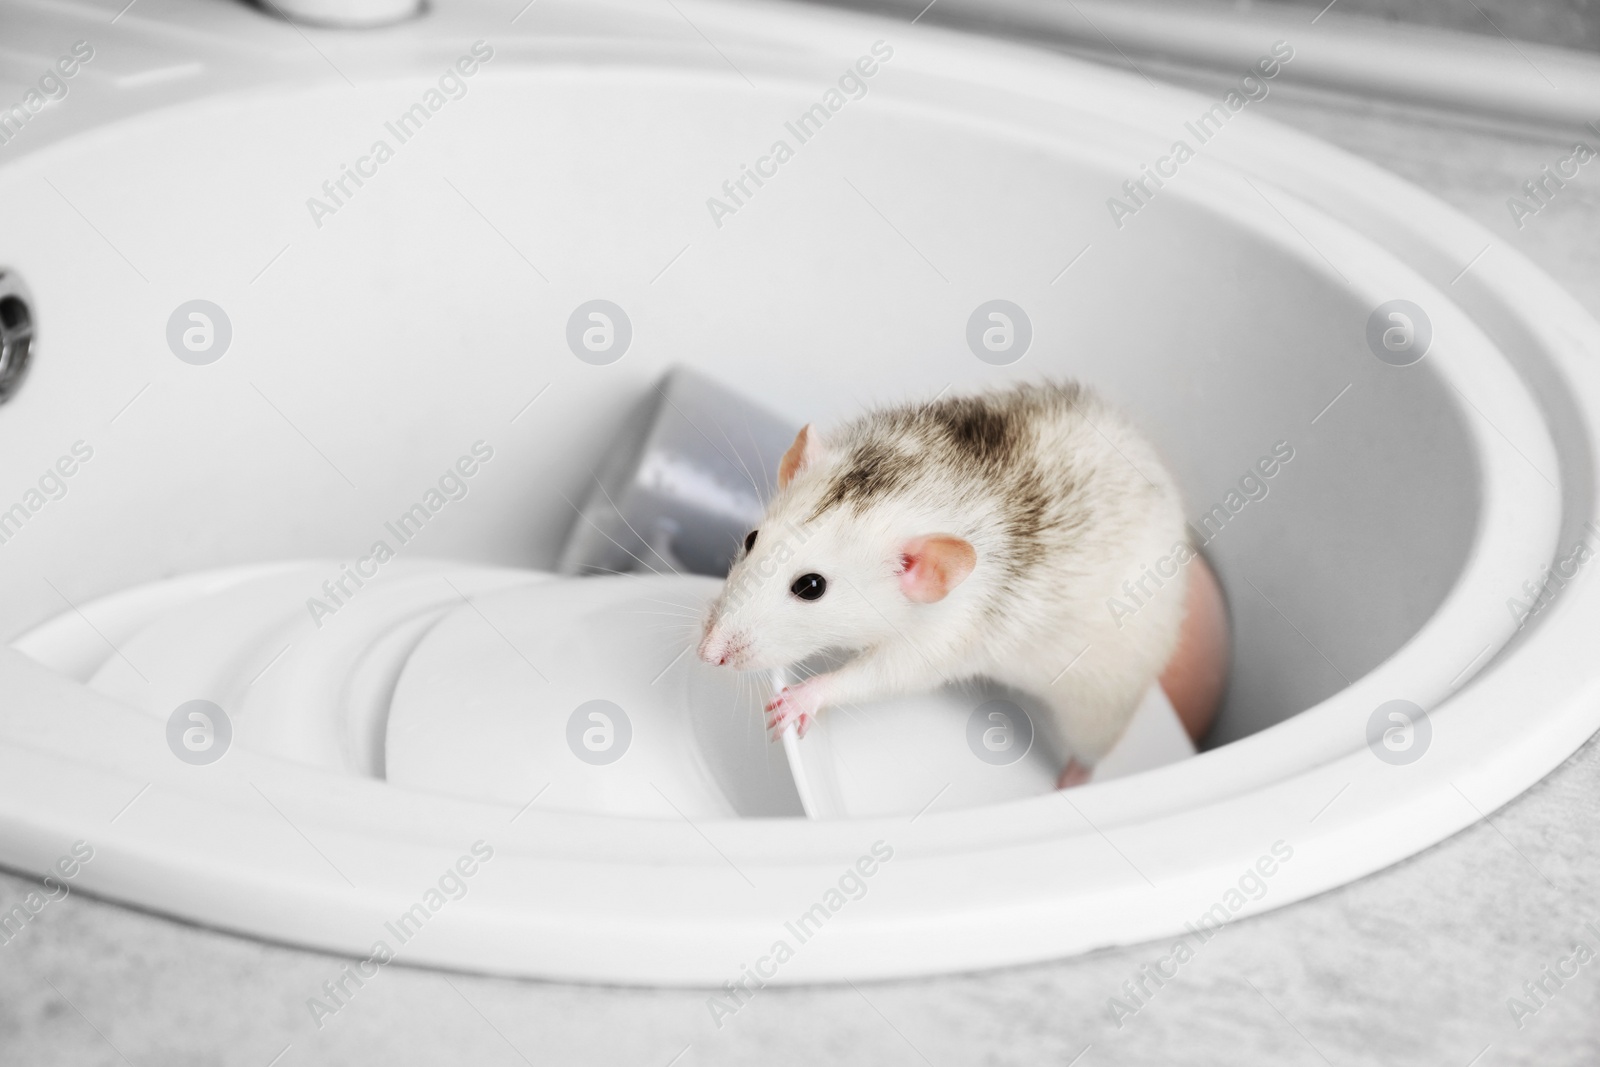 Photo of Rat in sink with dishes at kitchen. Household pest